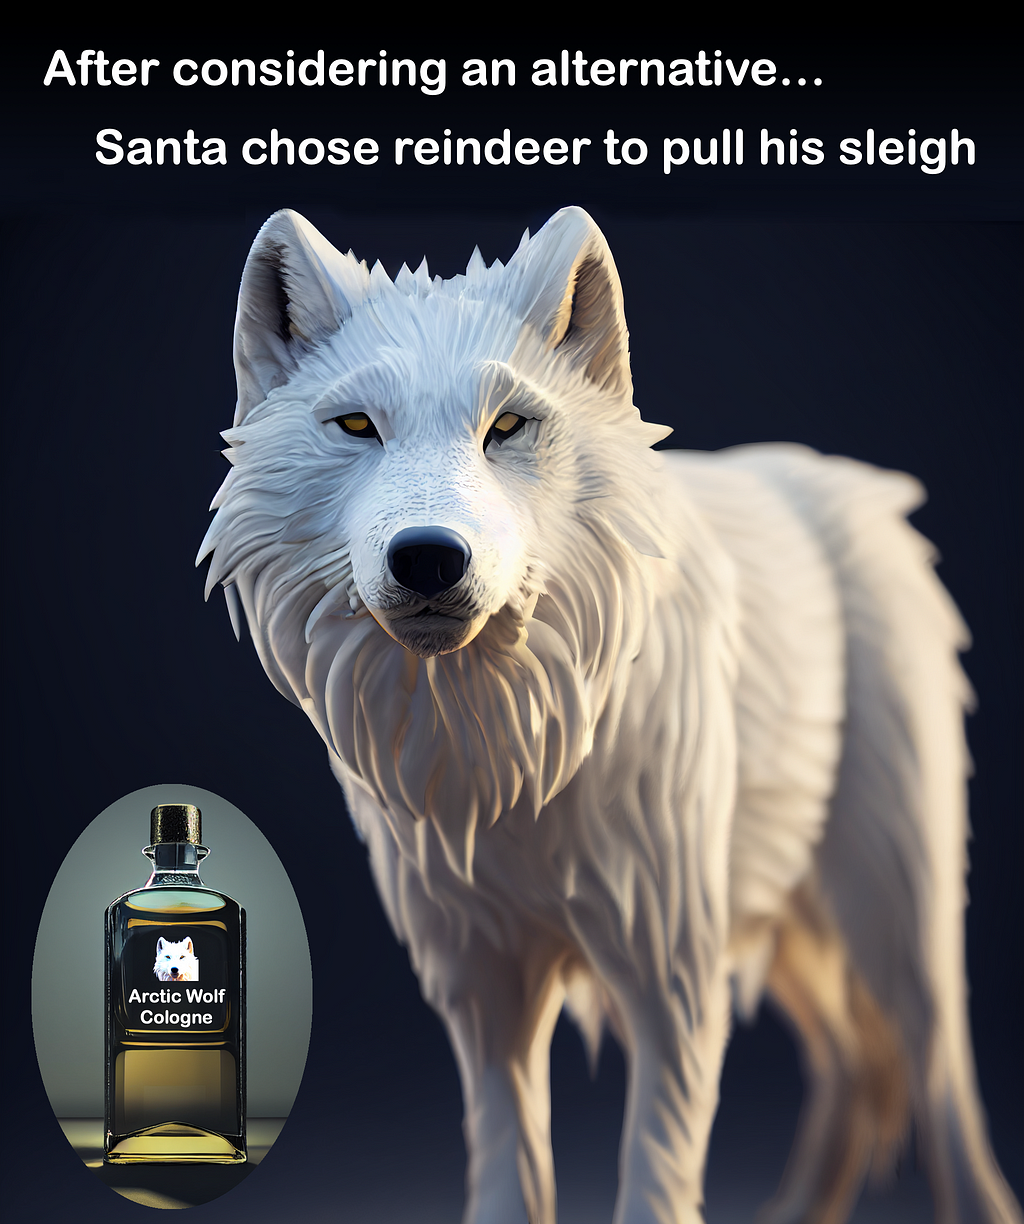 Simulated magazine advertisement with arctic wolf and cologne bottle images. Text reads, “After considering an alternative… Santa chose reindeer to pull his sleigh.” Compiled by author.